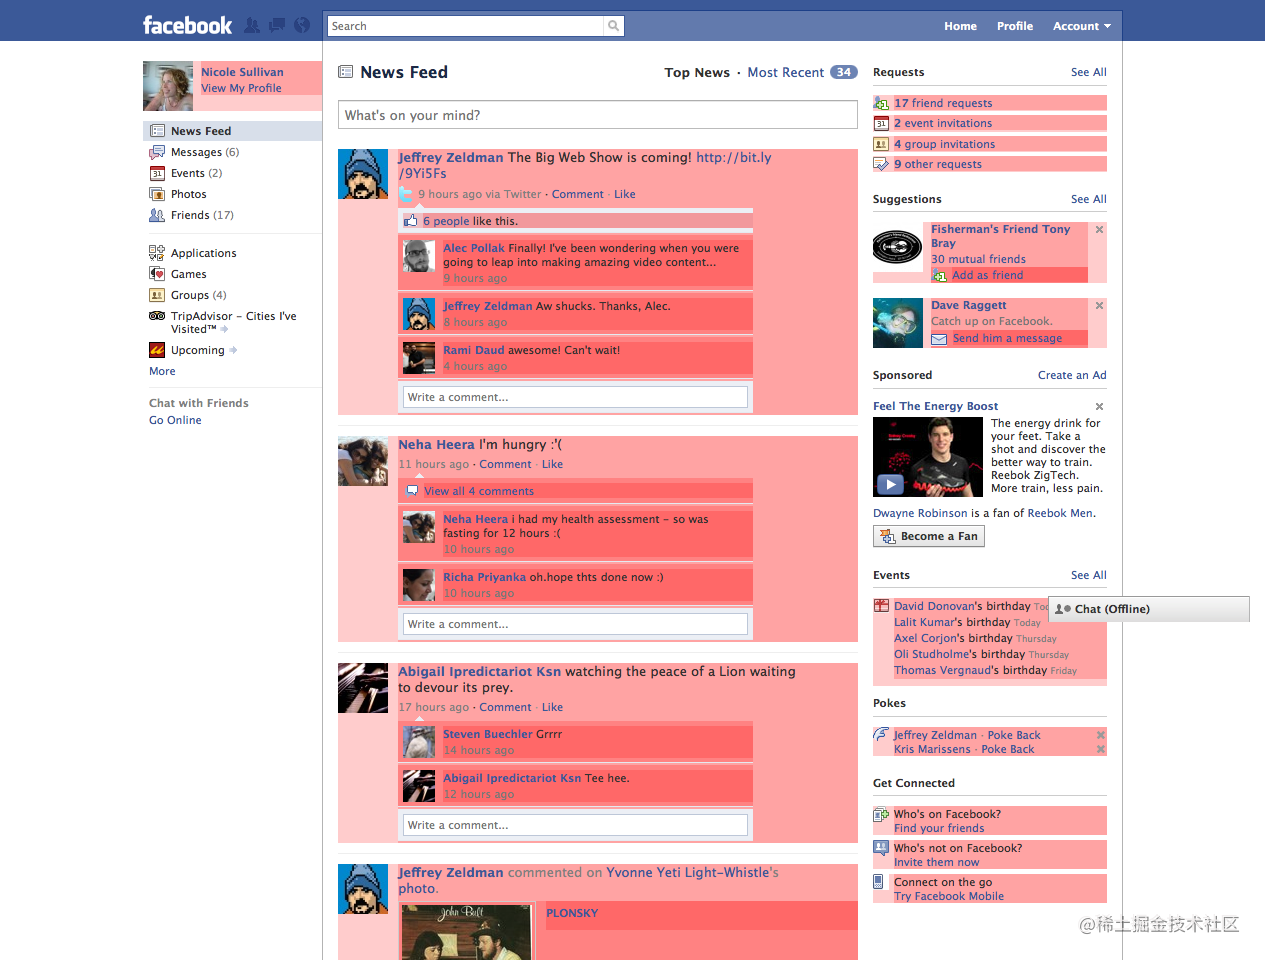 The media object highlighted in red on the facebook homepage